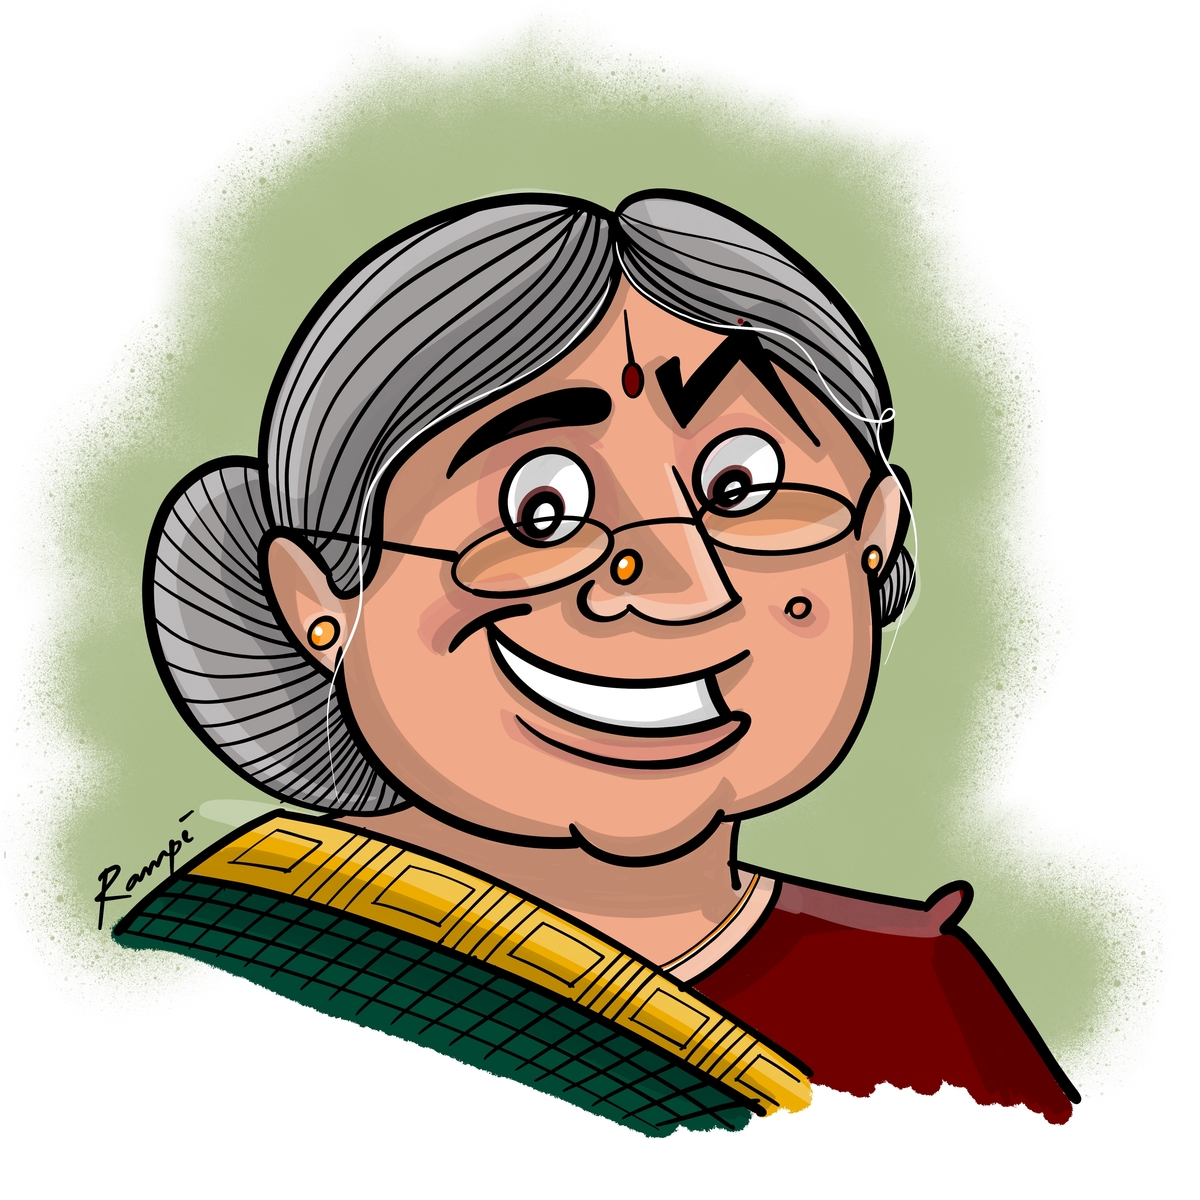 The Indian Granny By Ramprasad S On Dribbble